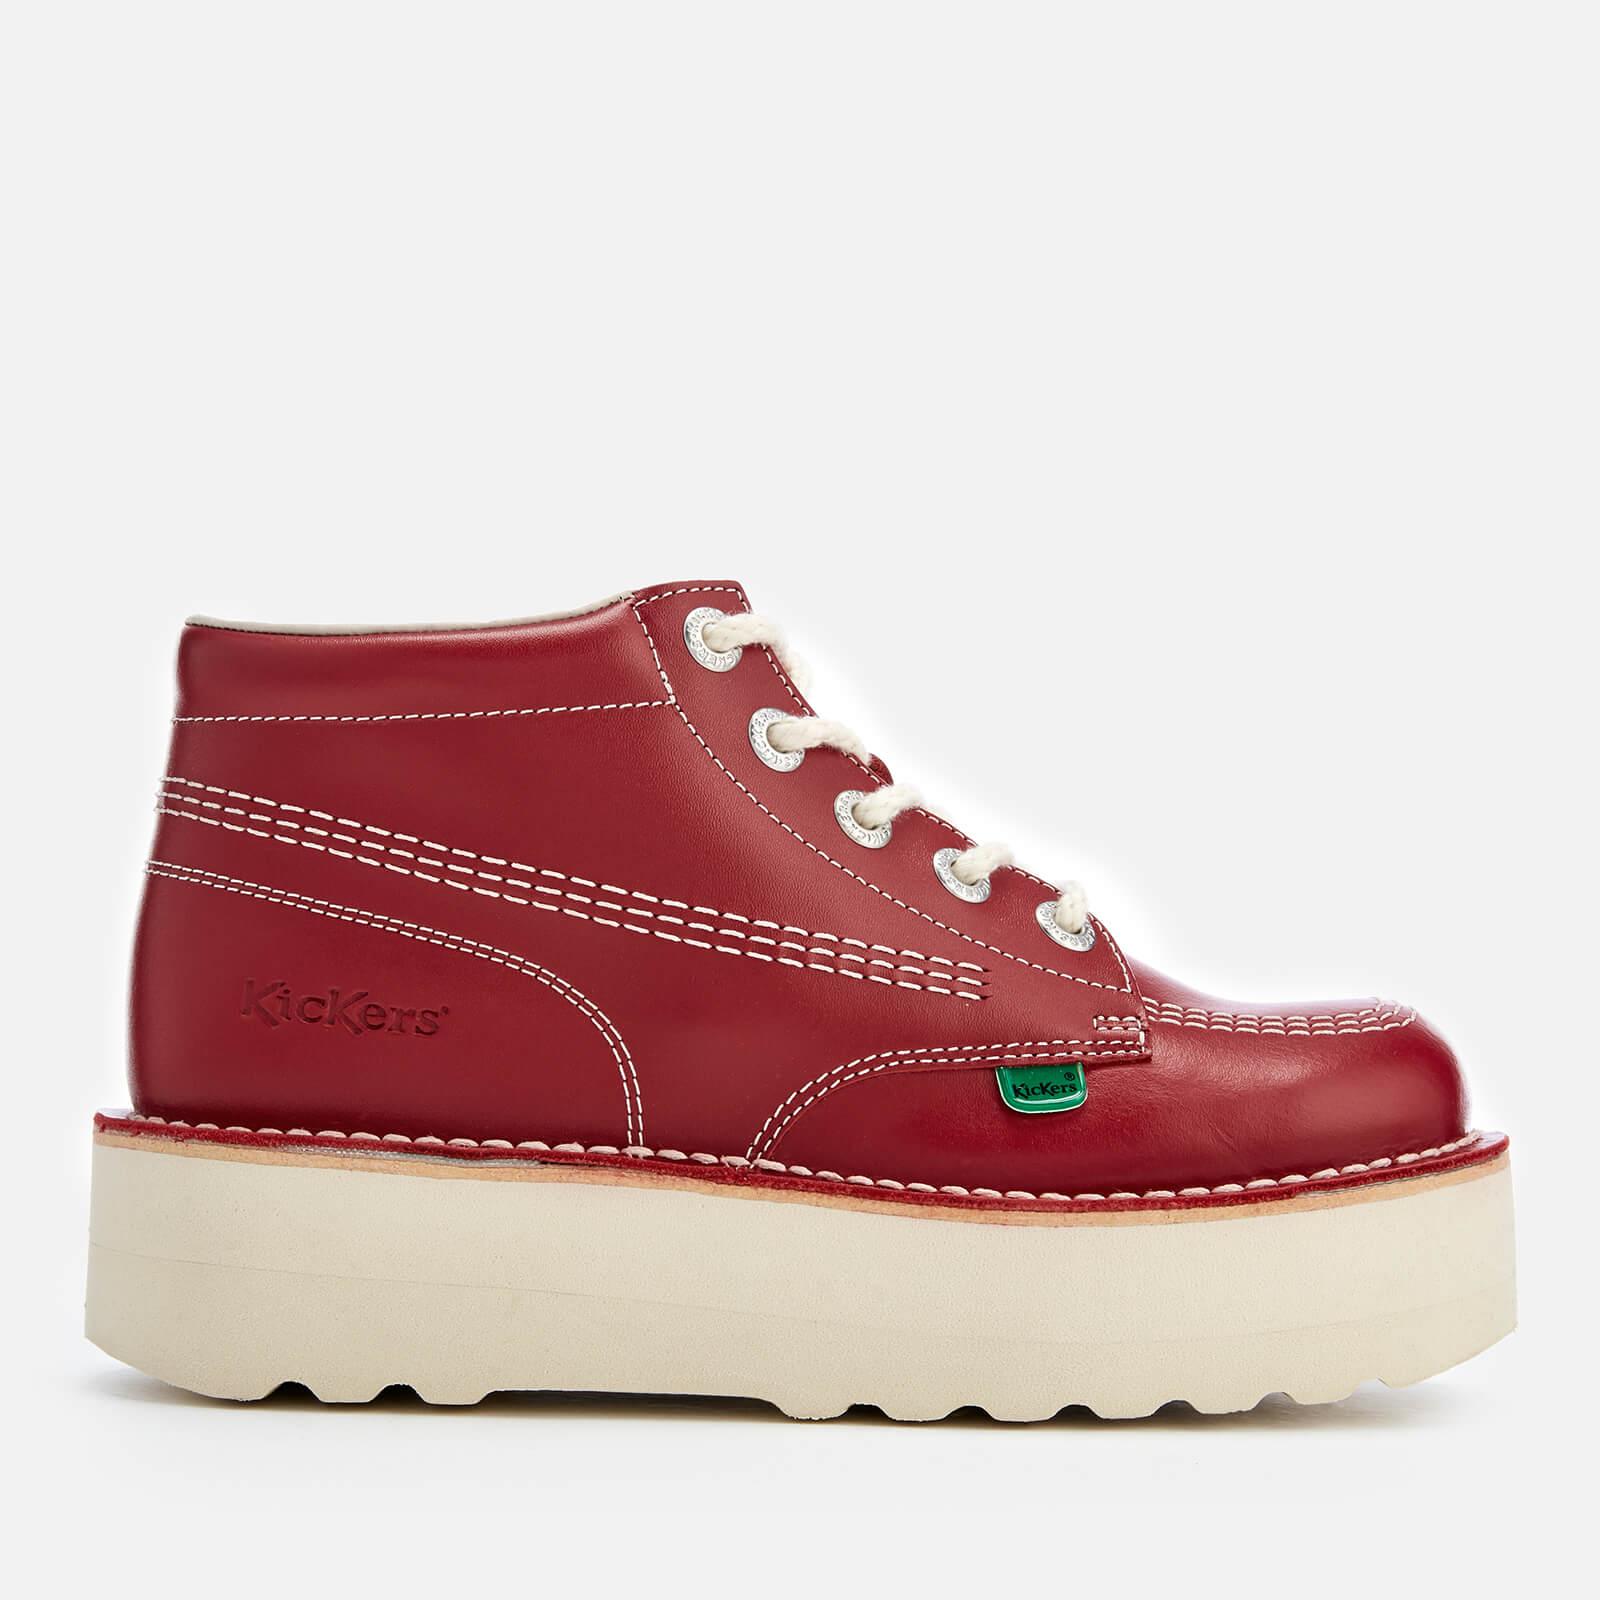 Kickers Hi Stack Red Leather Boots - Lyst